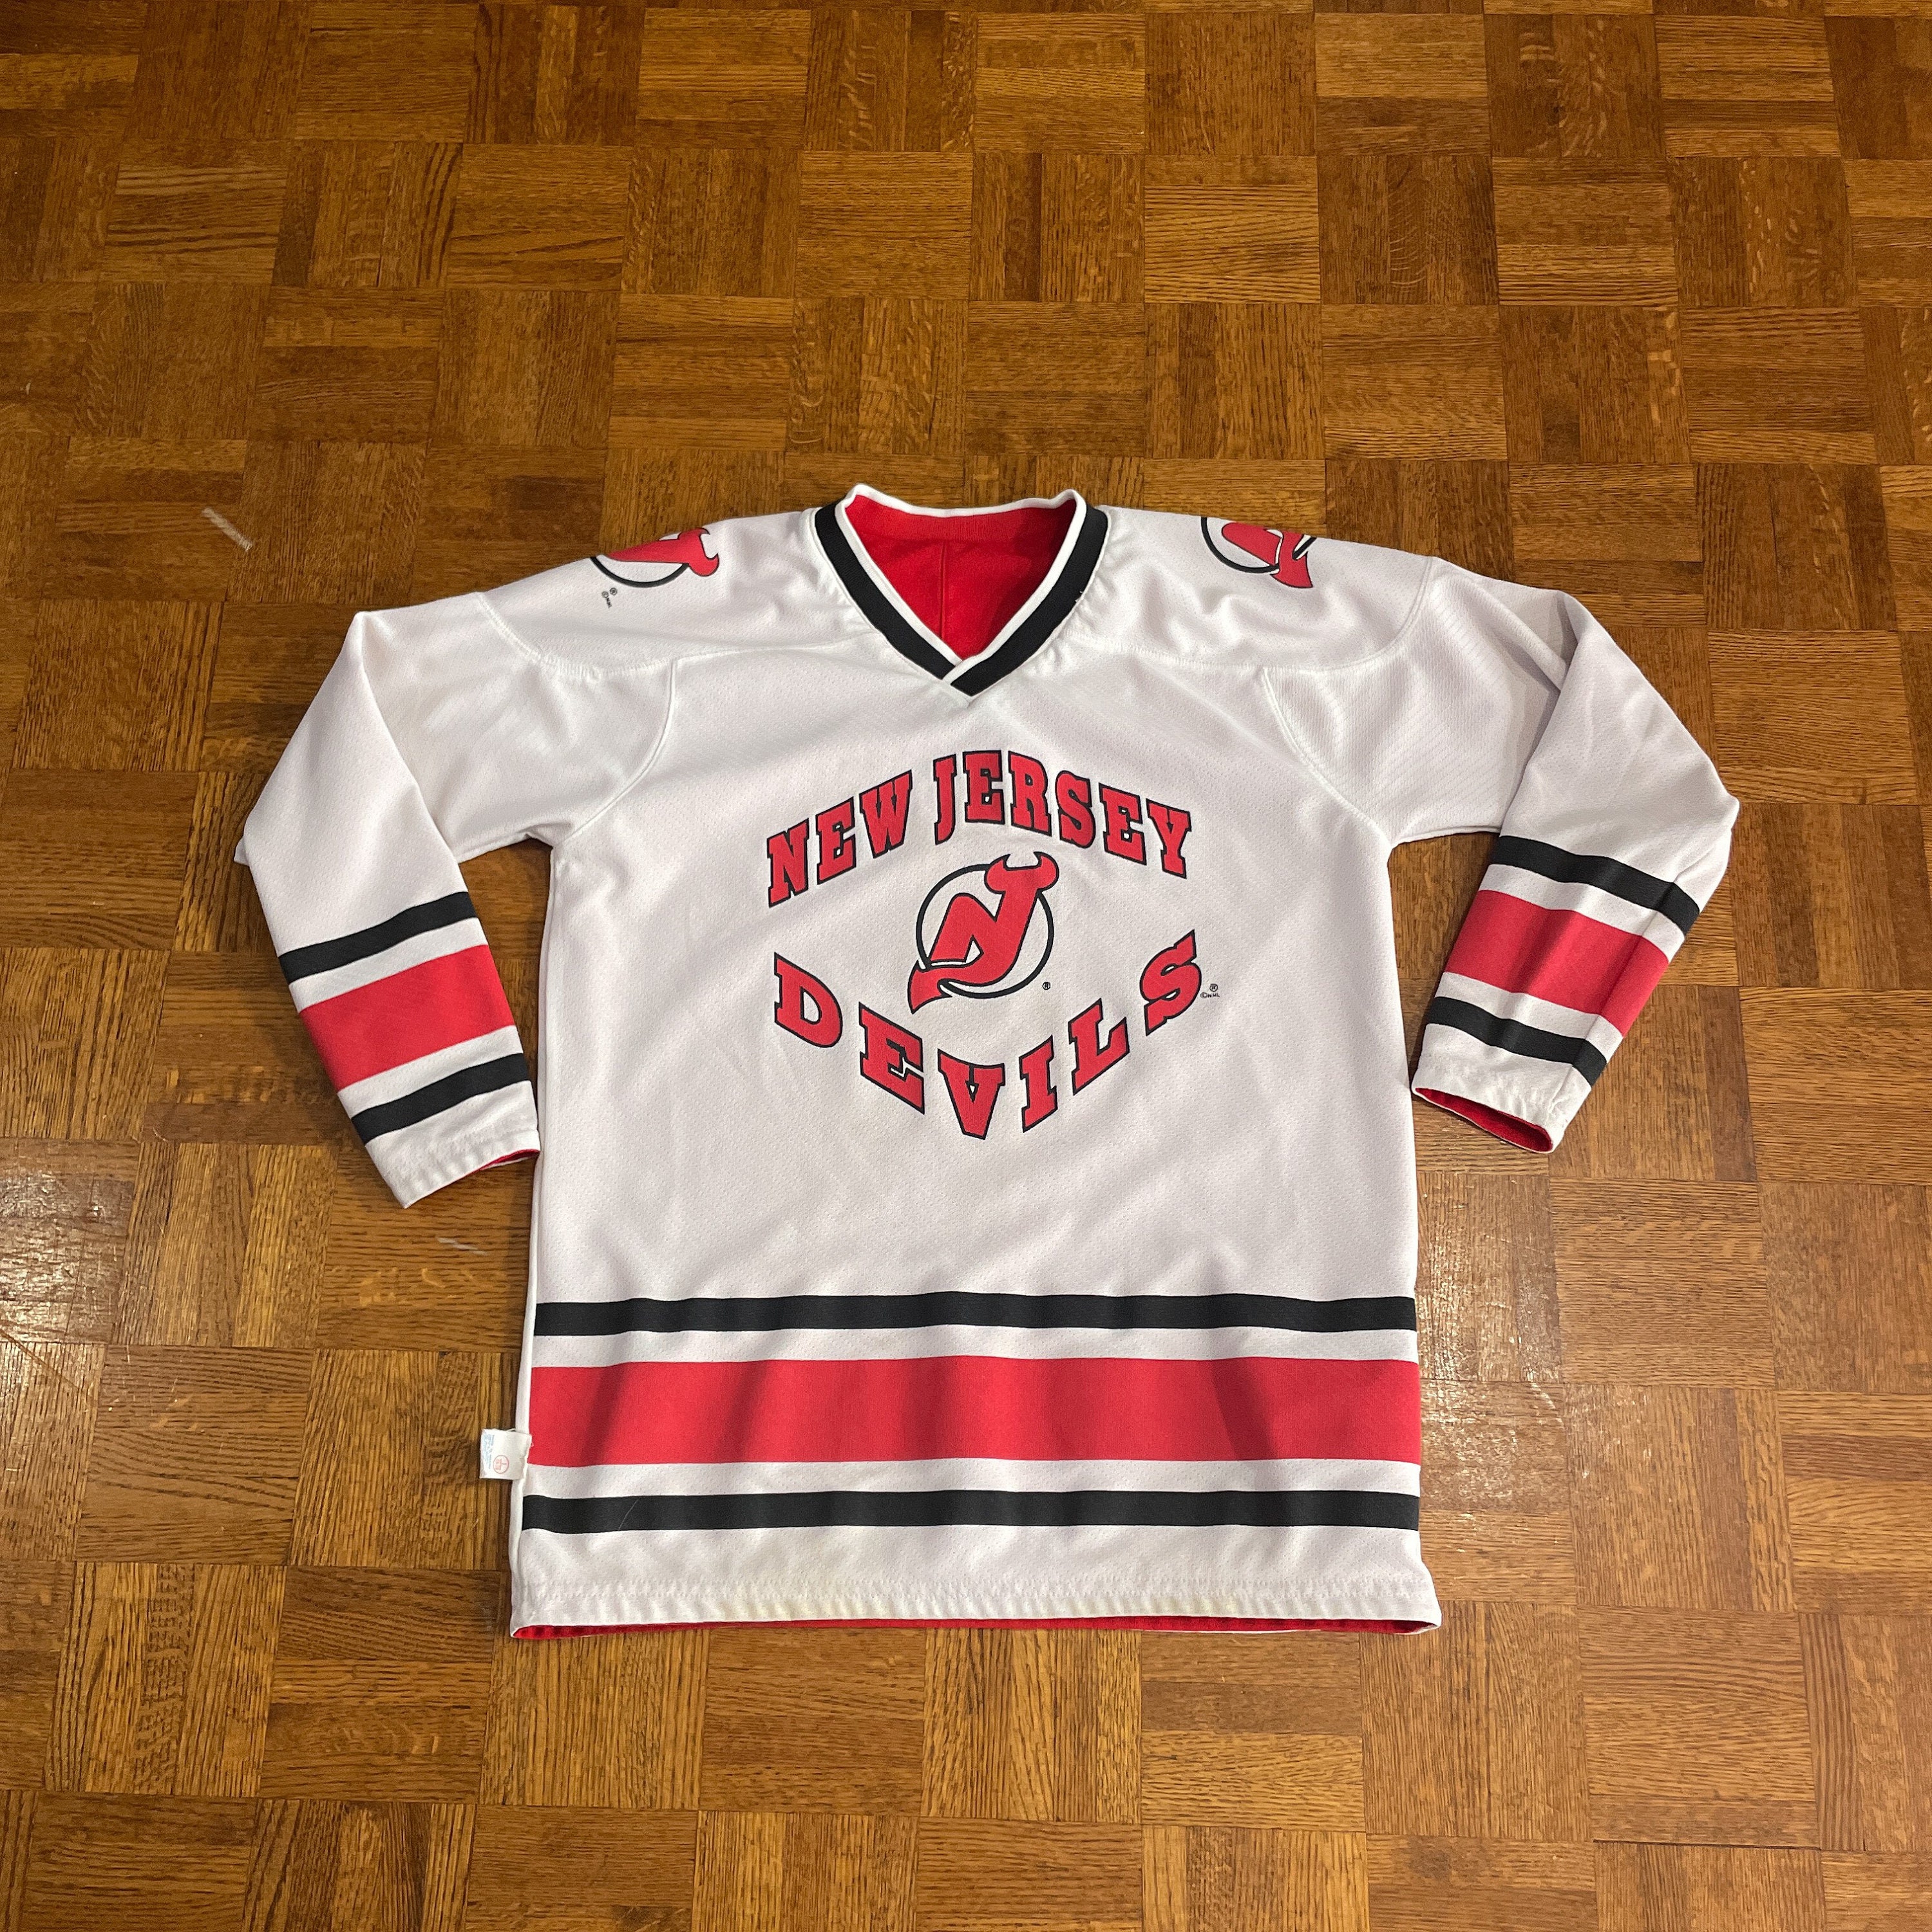 New Jersey Devils Game Used NHL Jerseys for sale